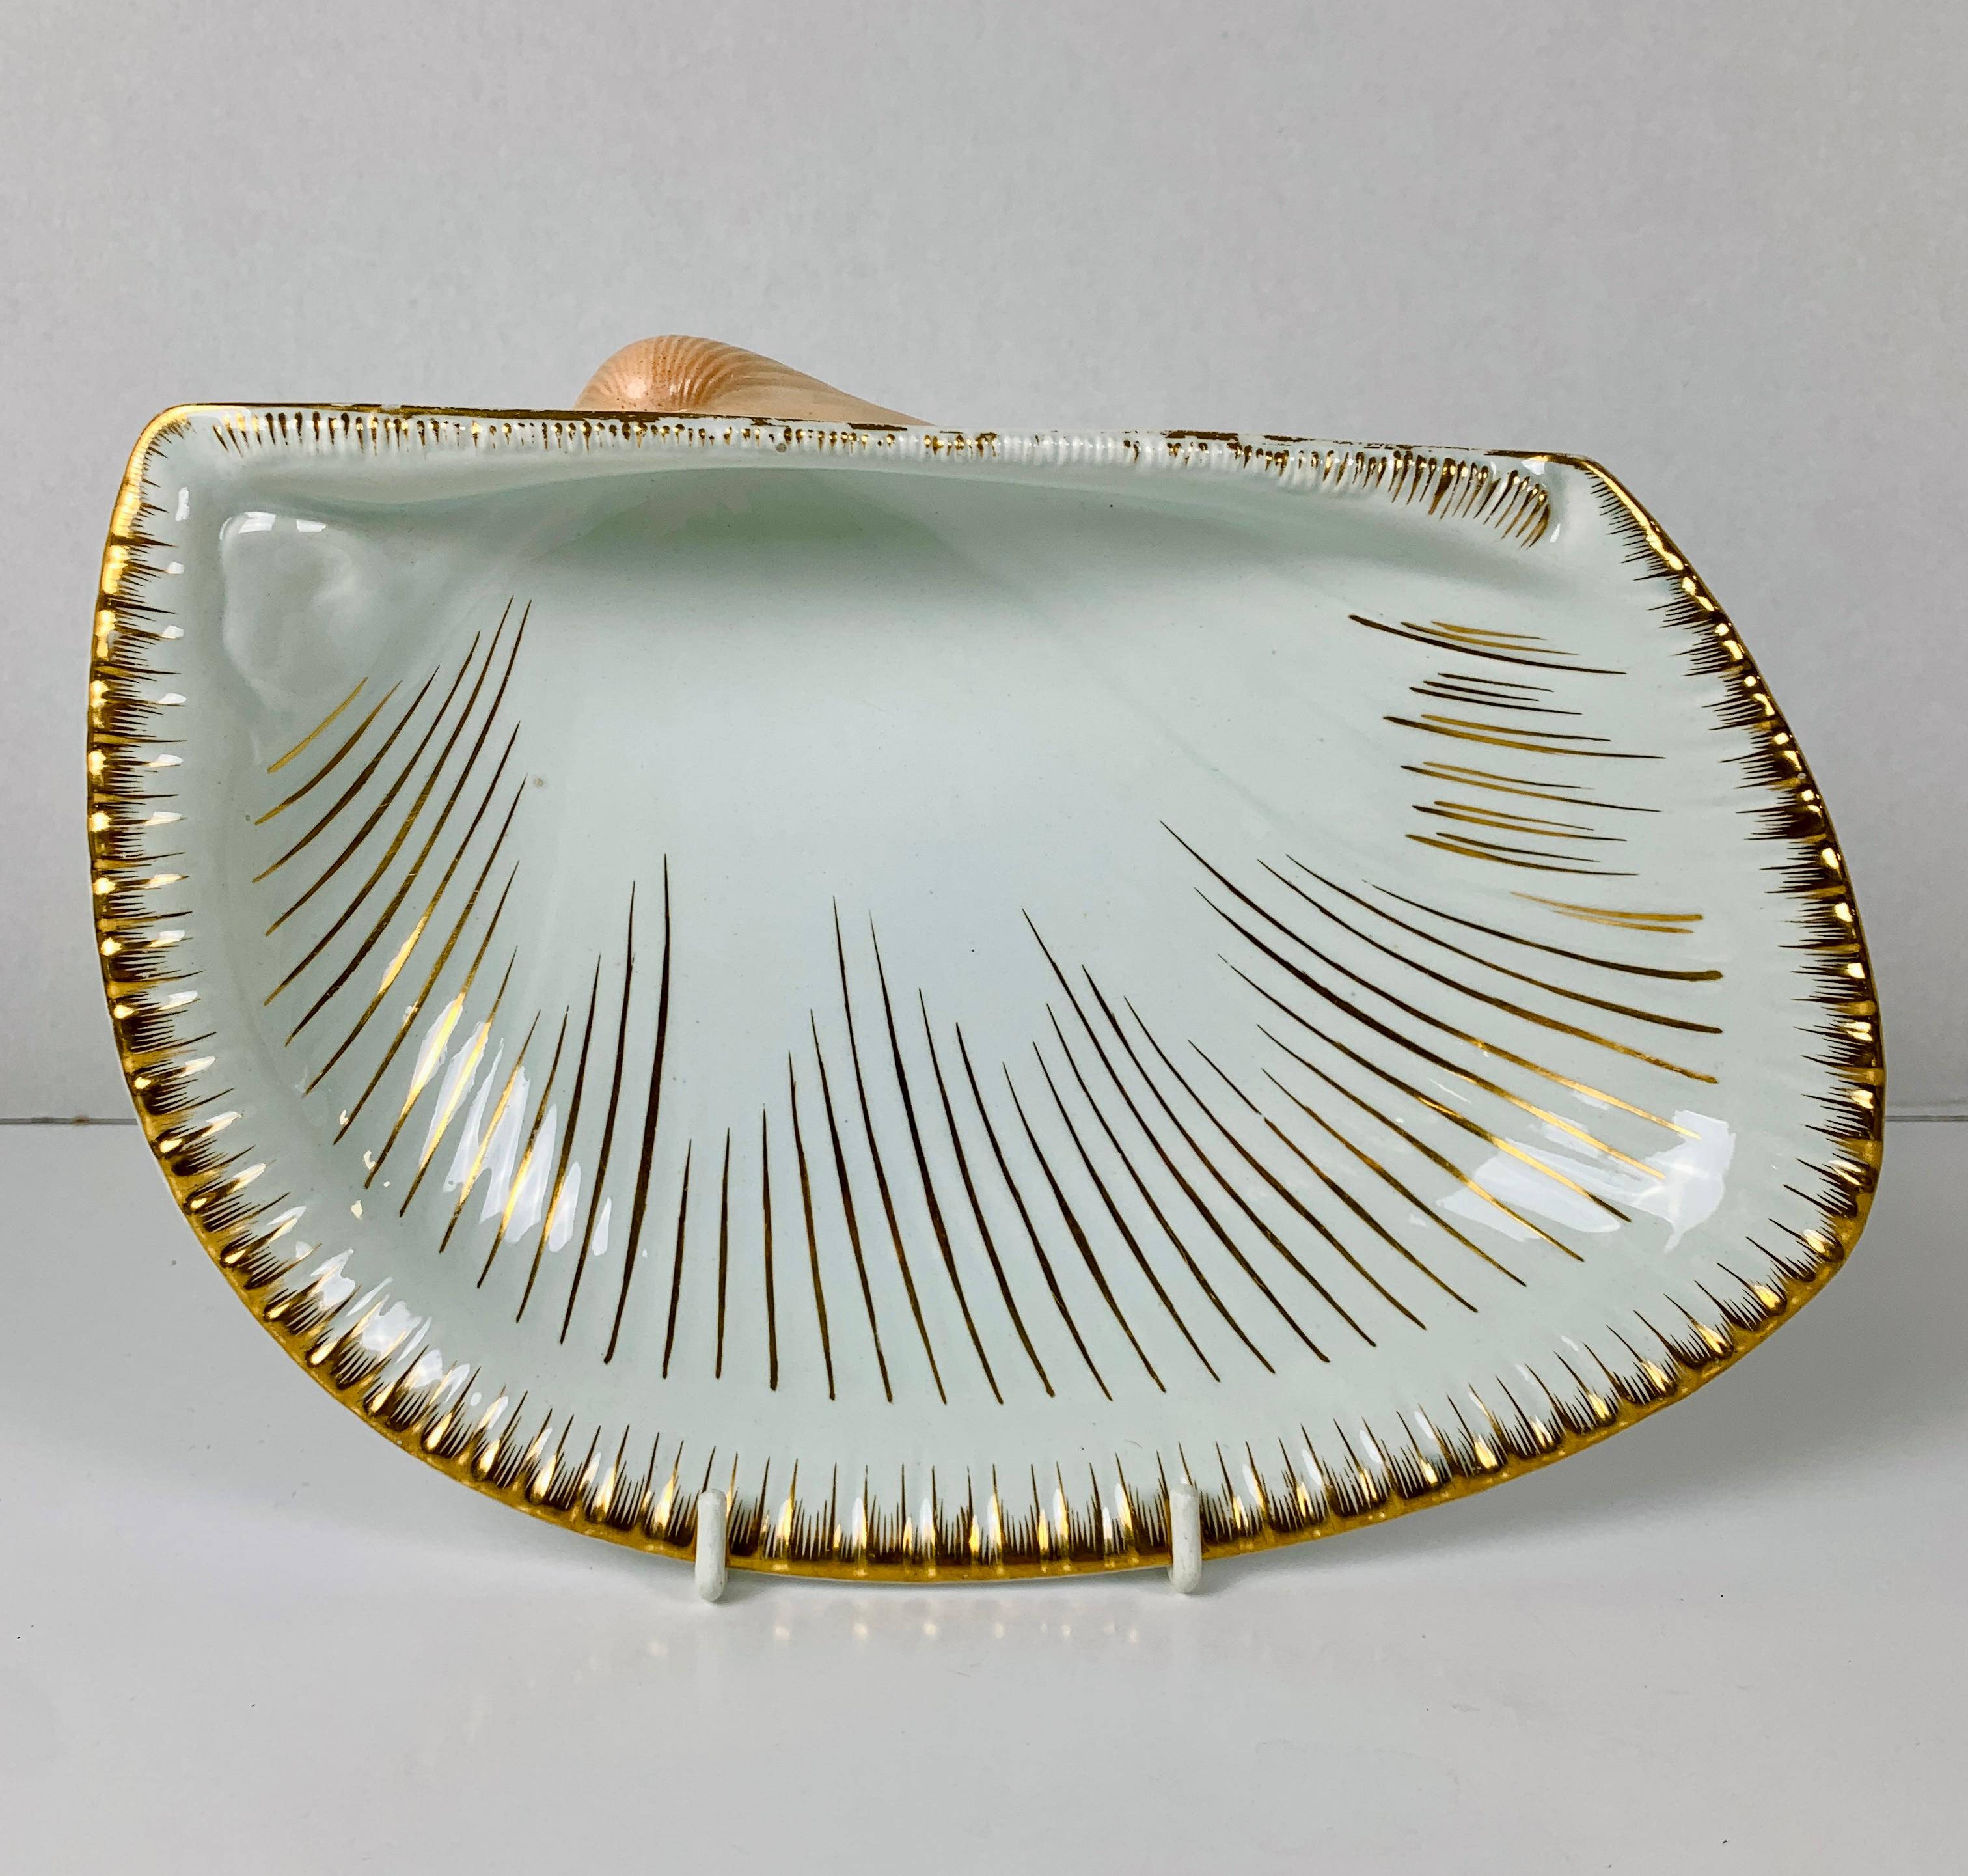 English Wedgwood Set with Scallop Shell Shaped Dishes, Clam Shaped Tureens & a Nautilus